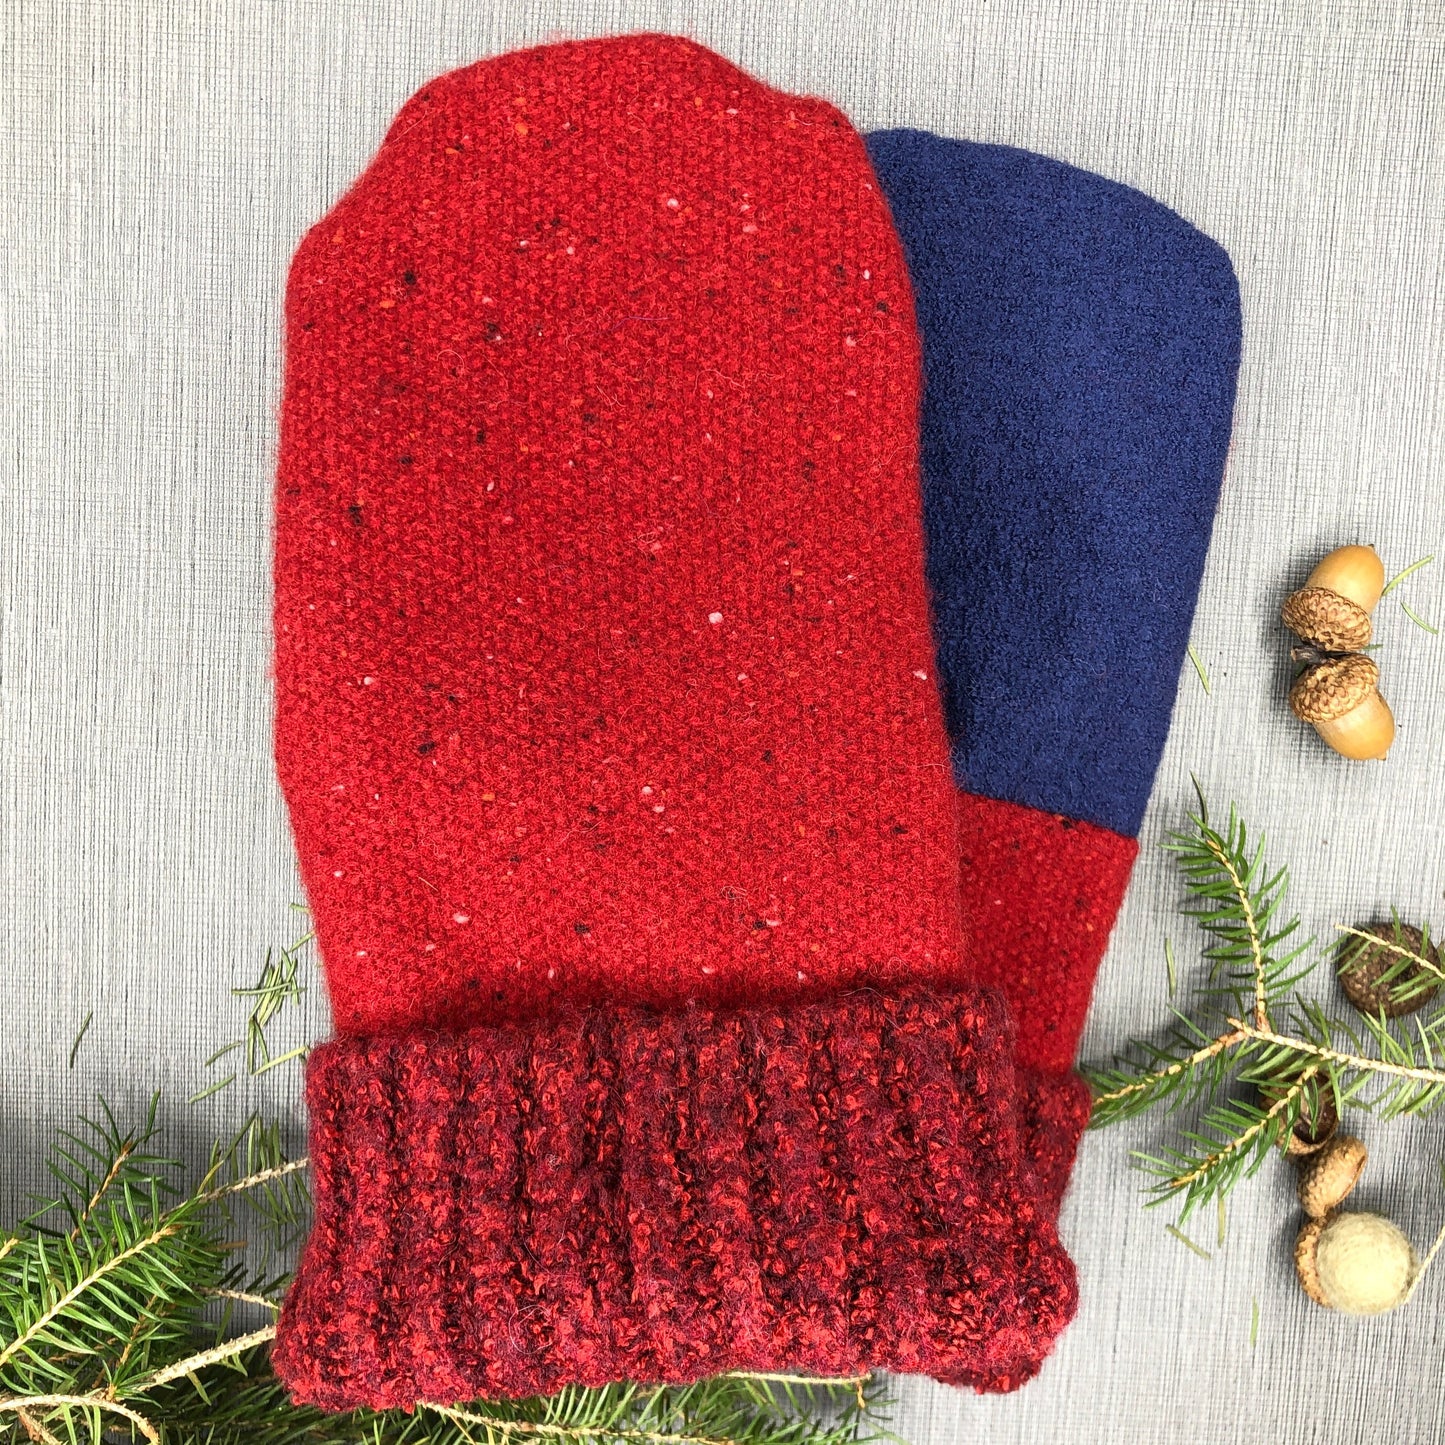 Large Wool Blend Red/Blue